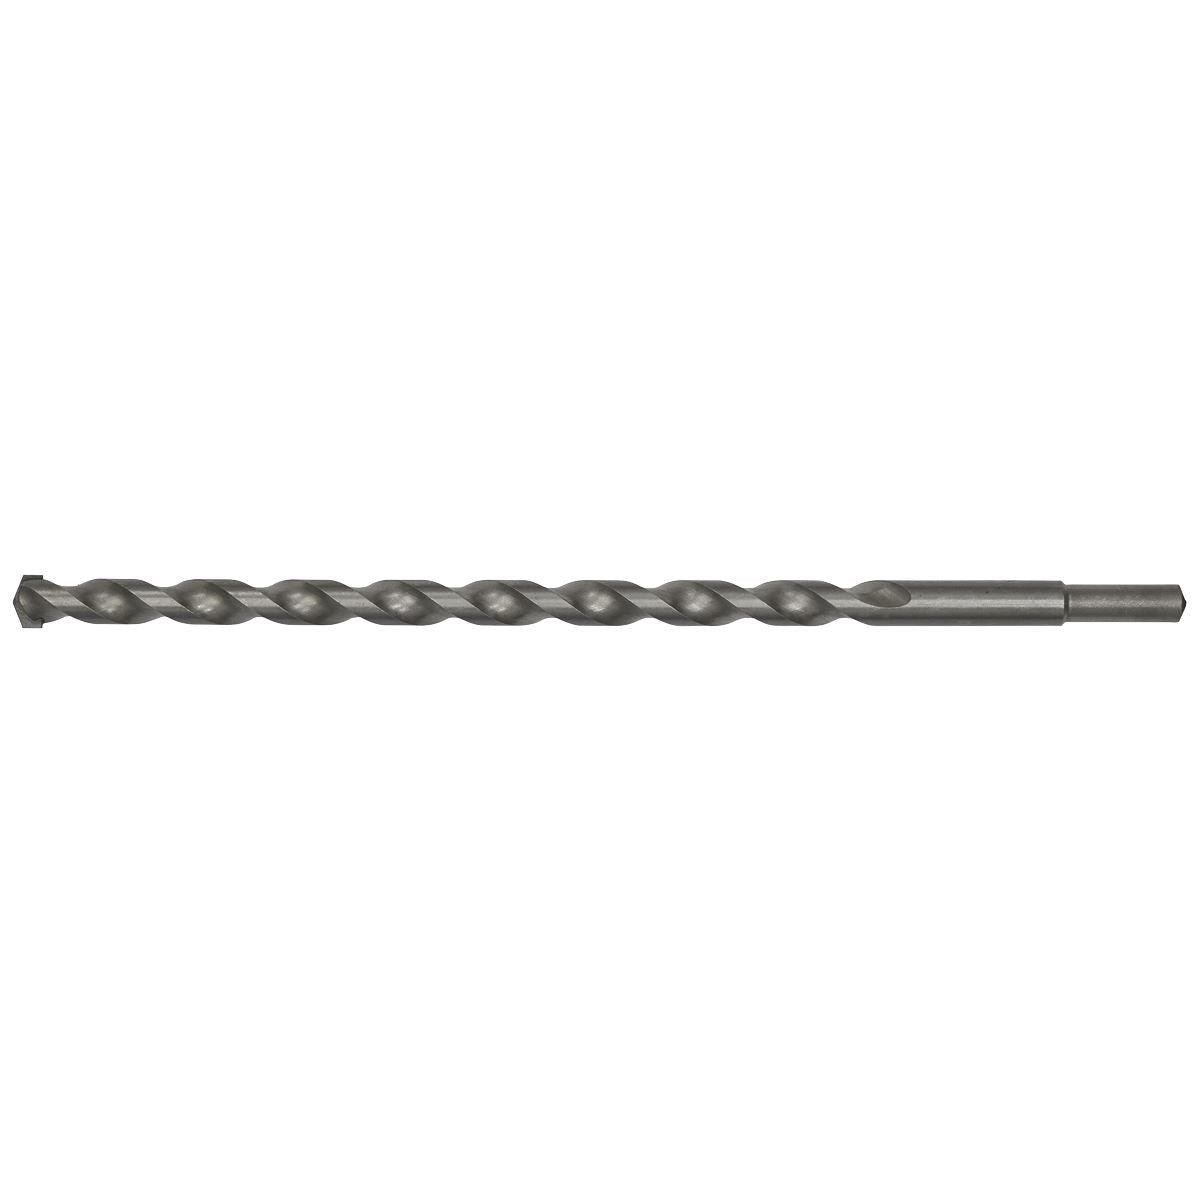 Worksafe by Sealey Straight Shank Rotary Impact Drill Bit Ø18 x 300mm